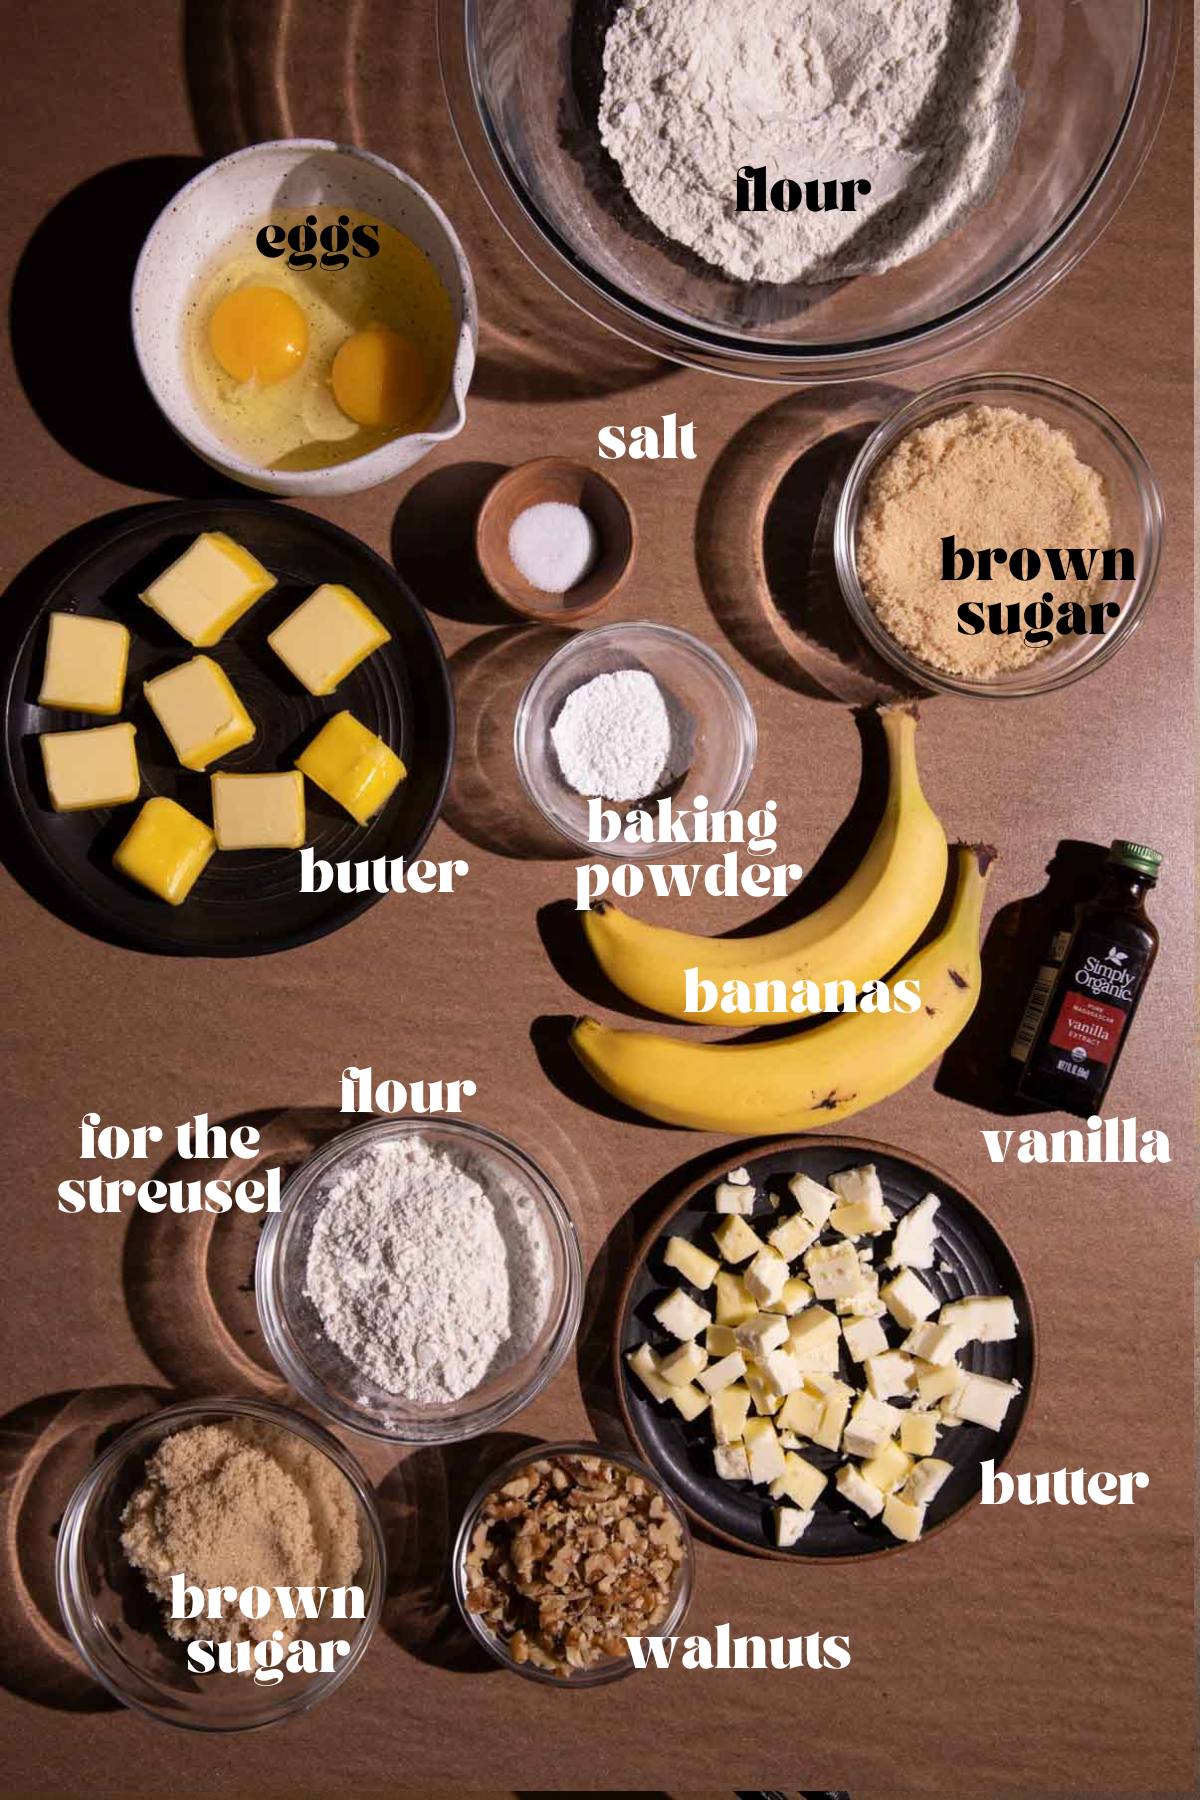 Banana walnut muffins ingredients in bowls and plates